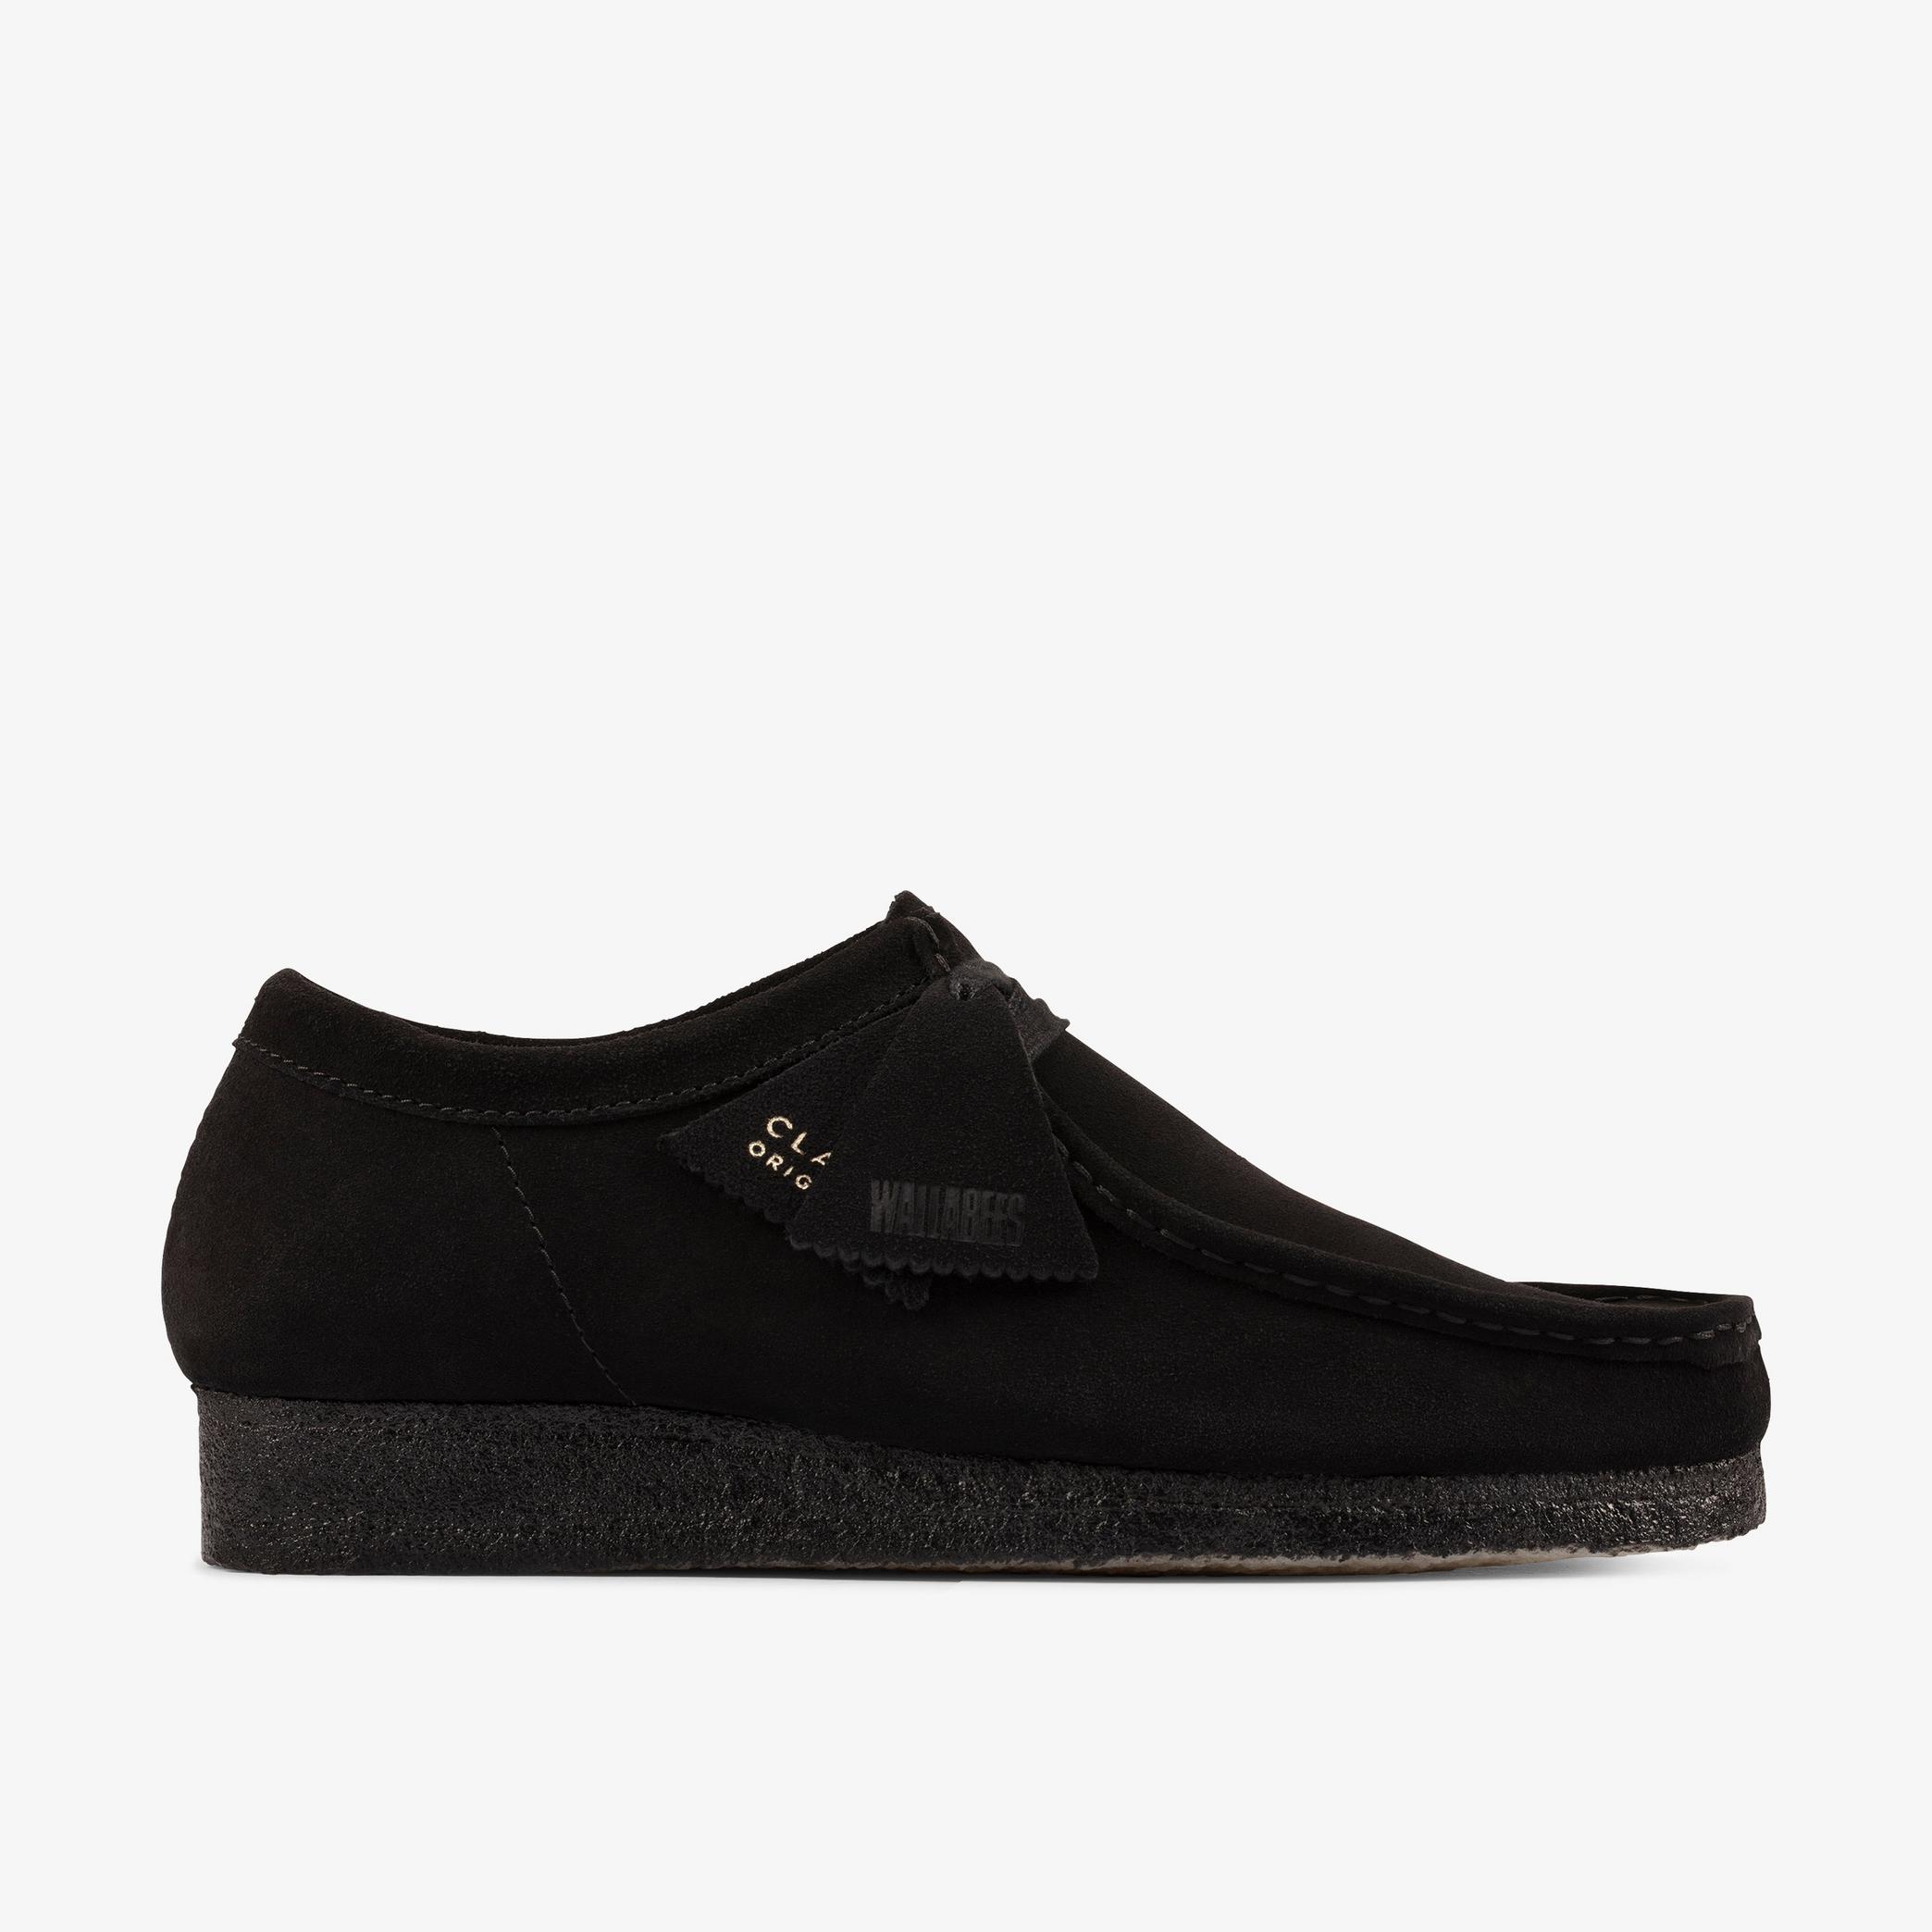 Mens Wallabee Black Suede Shoes | Clarks UK